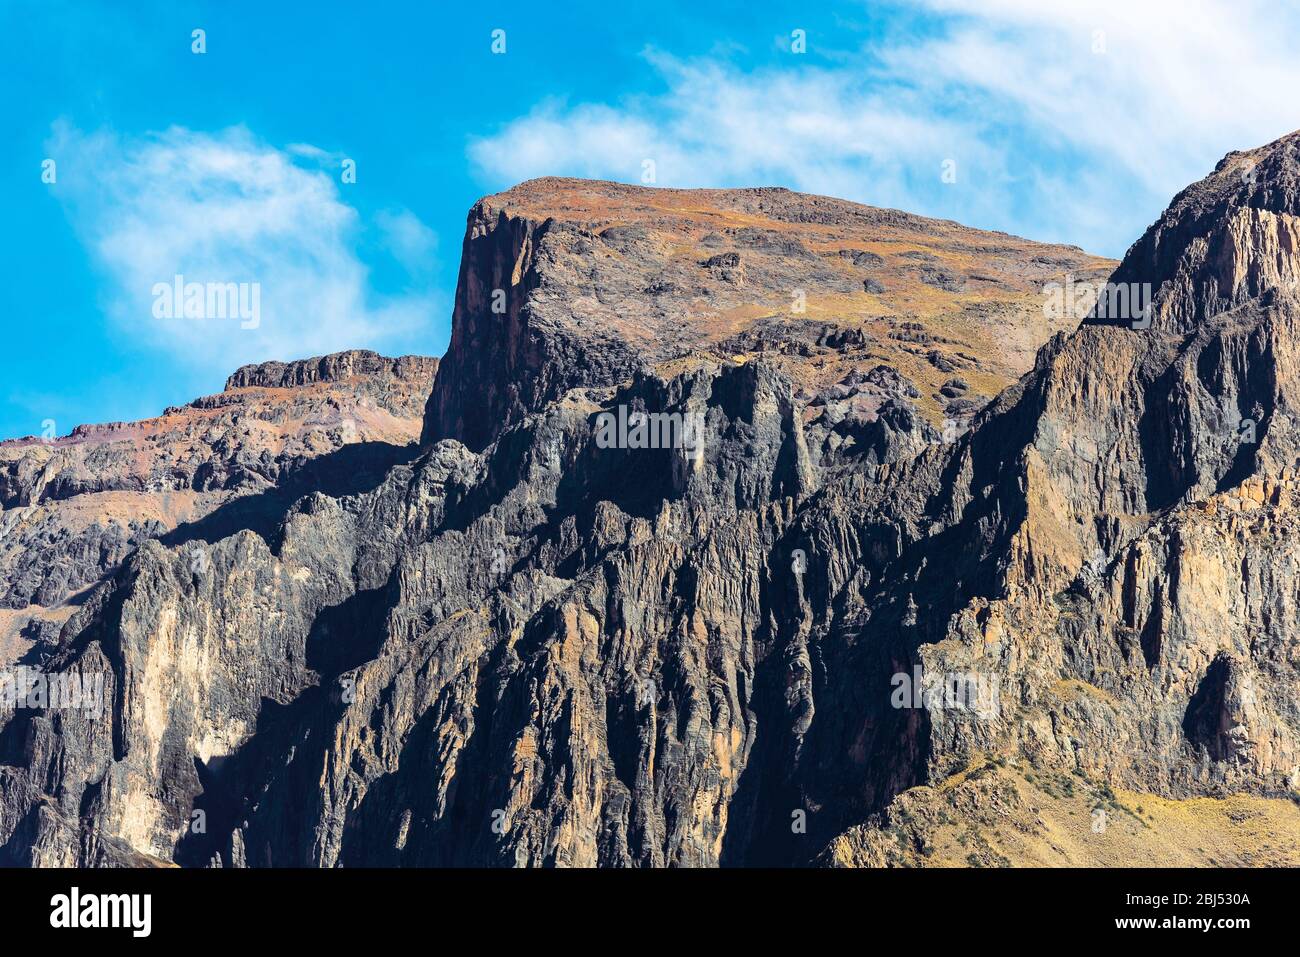 Landscape of the Andes Mountain Peaks by the Condor's Cross bird watching viewpoint, Colca Canyon, Arequipa, Peru. Stock Photo